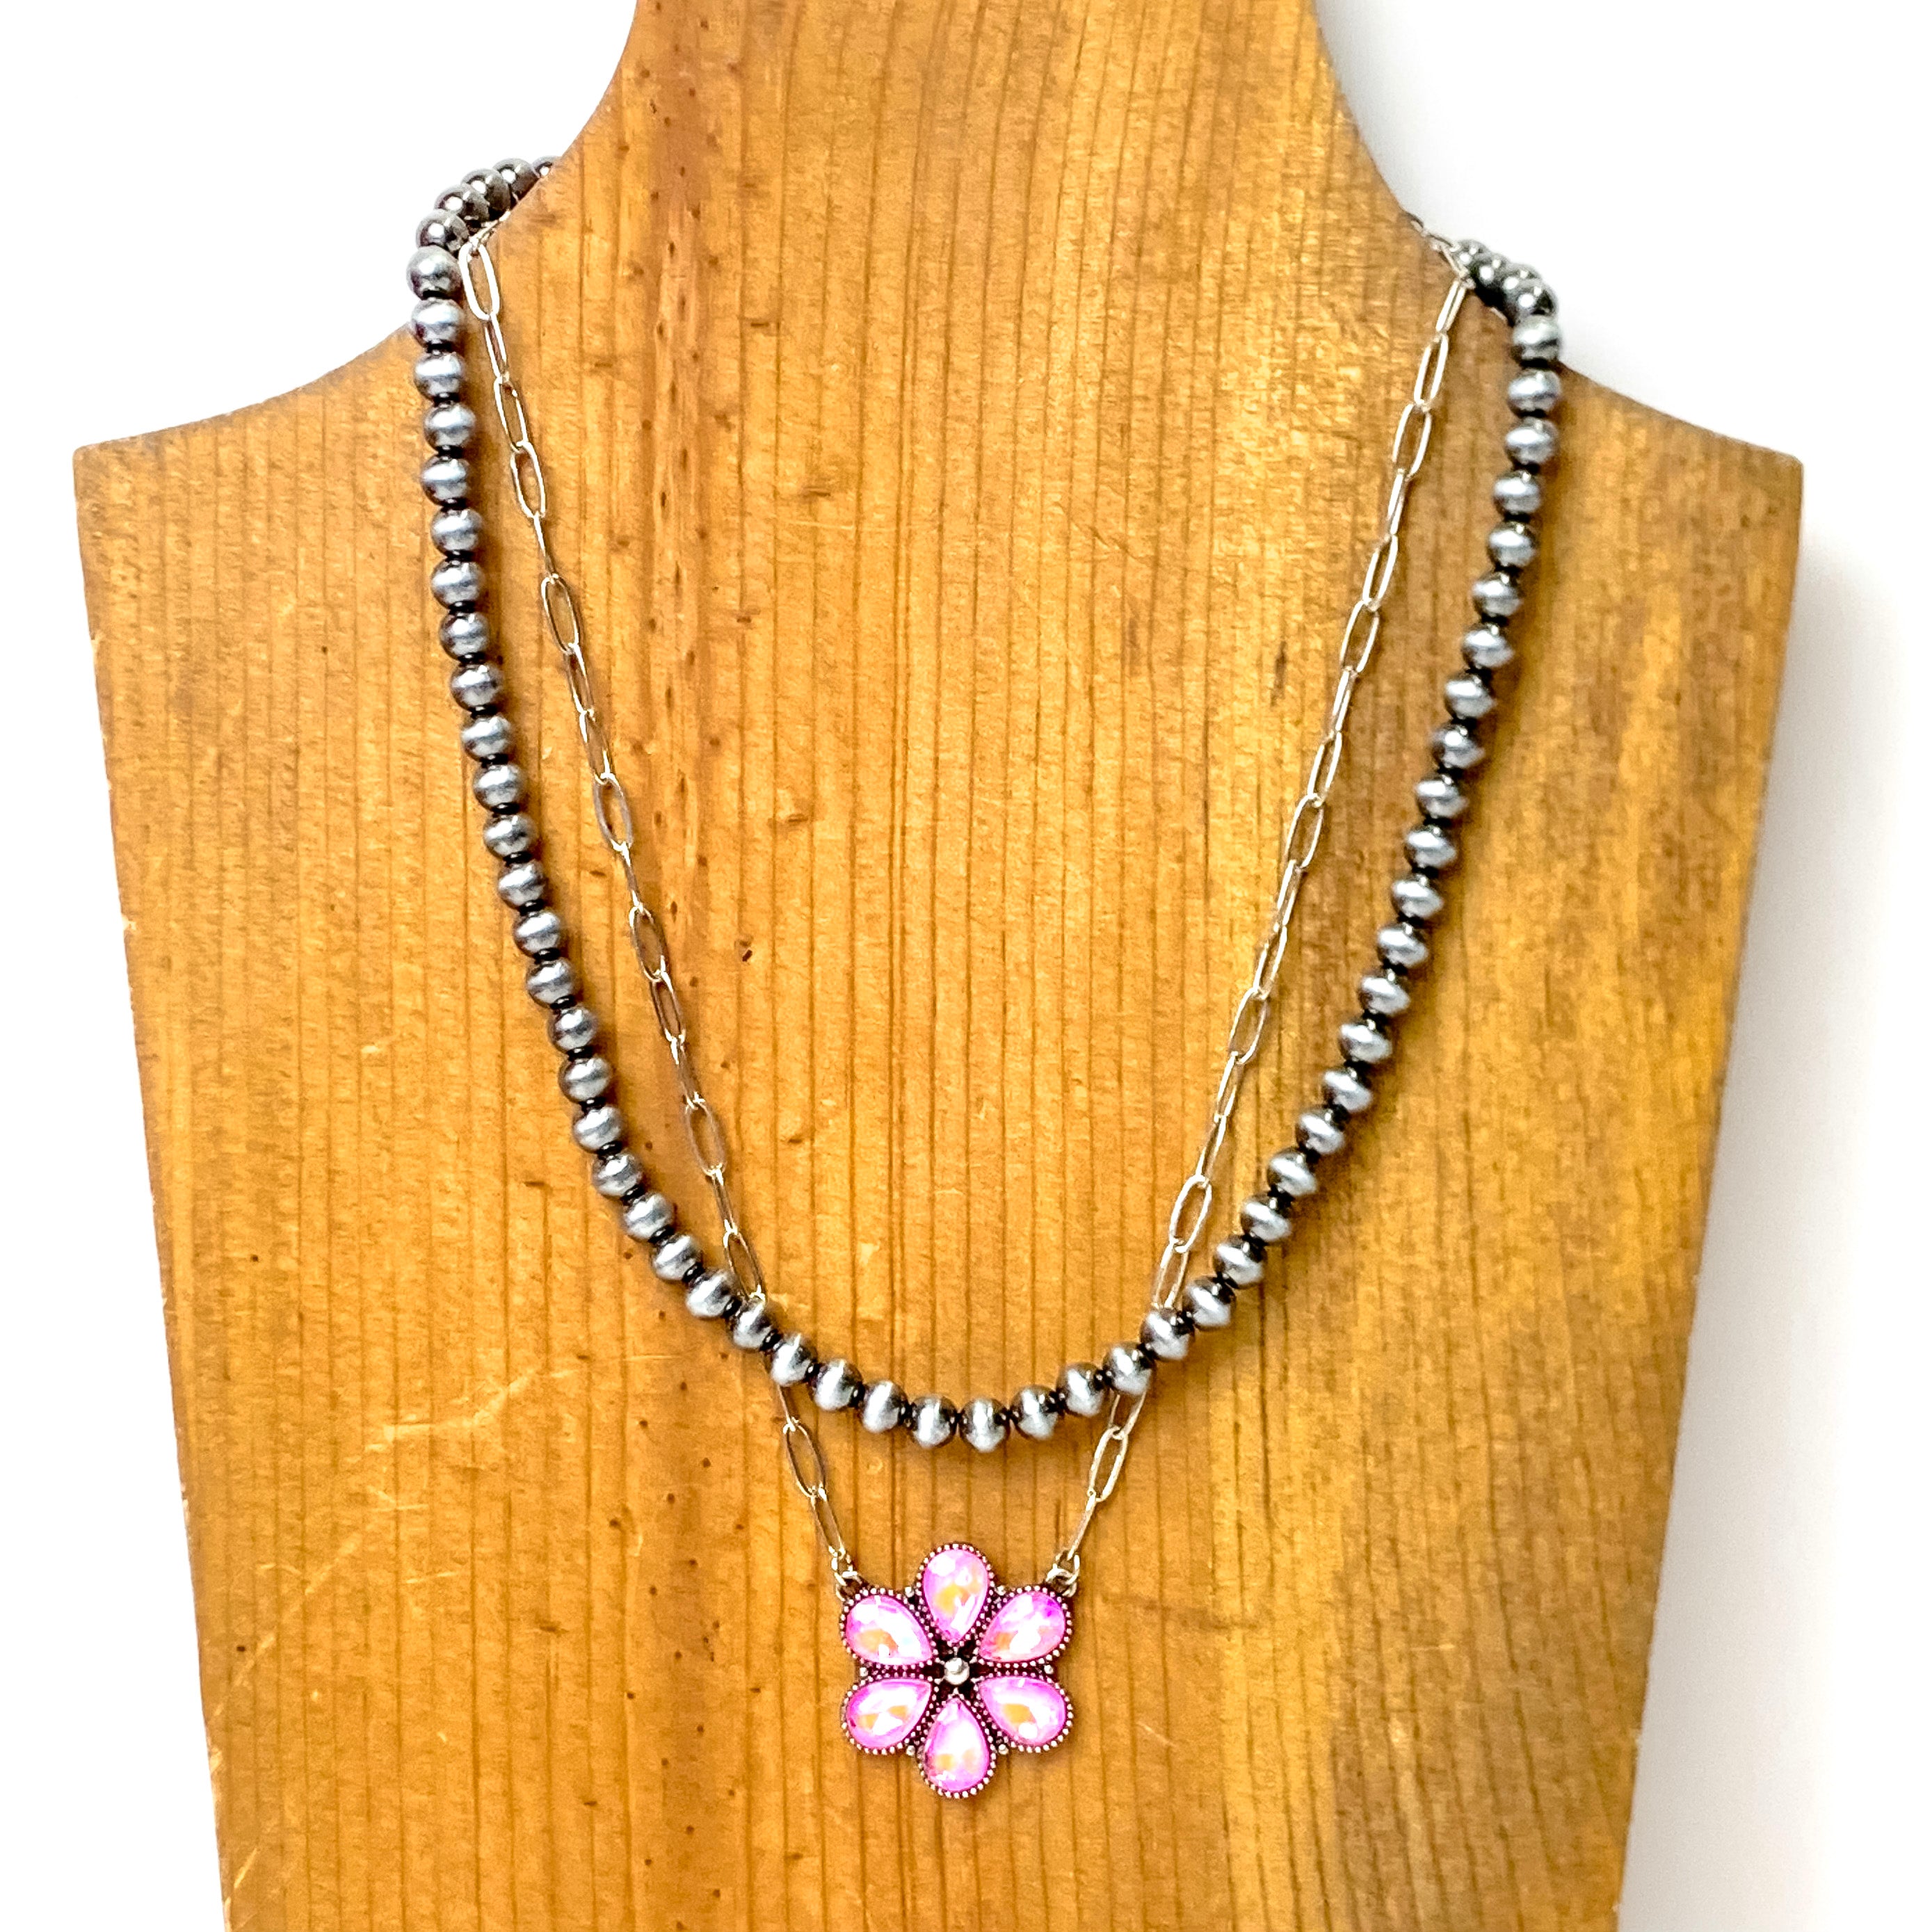 Prairie Petals Faux Navajo Pearl and Chain Necklace in Pink and Silver Tone - Giddy Up Glamour Boutique